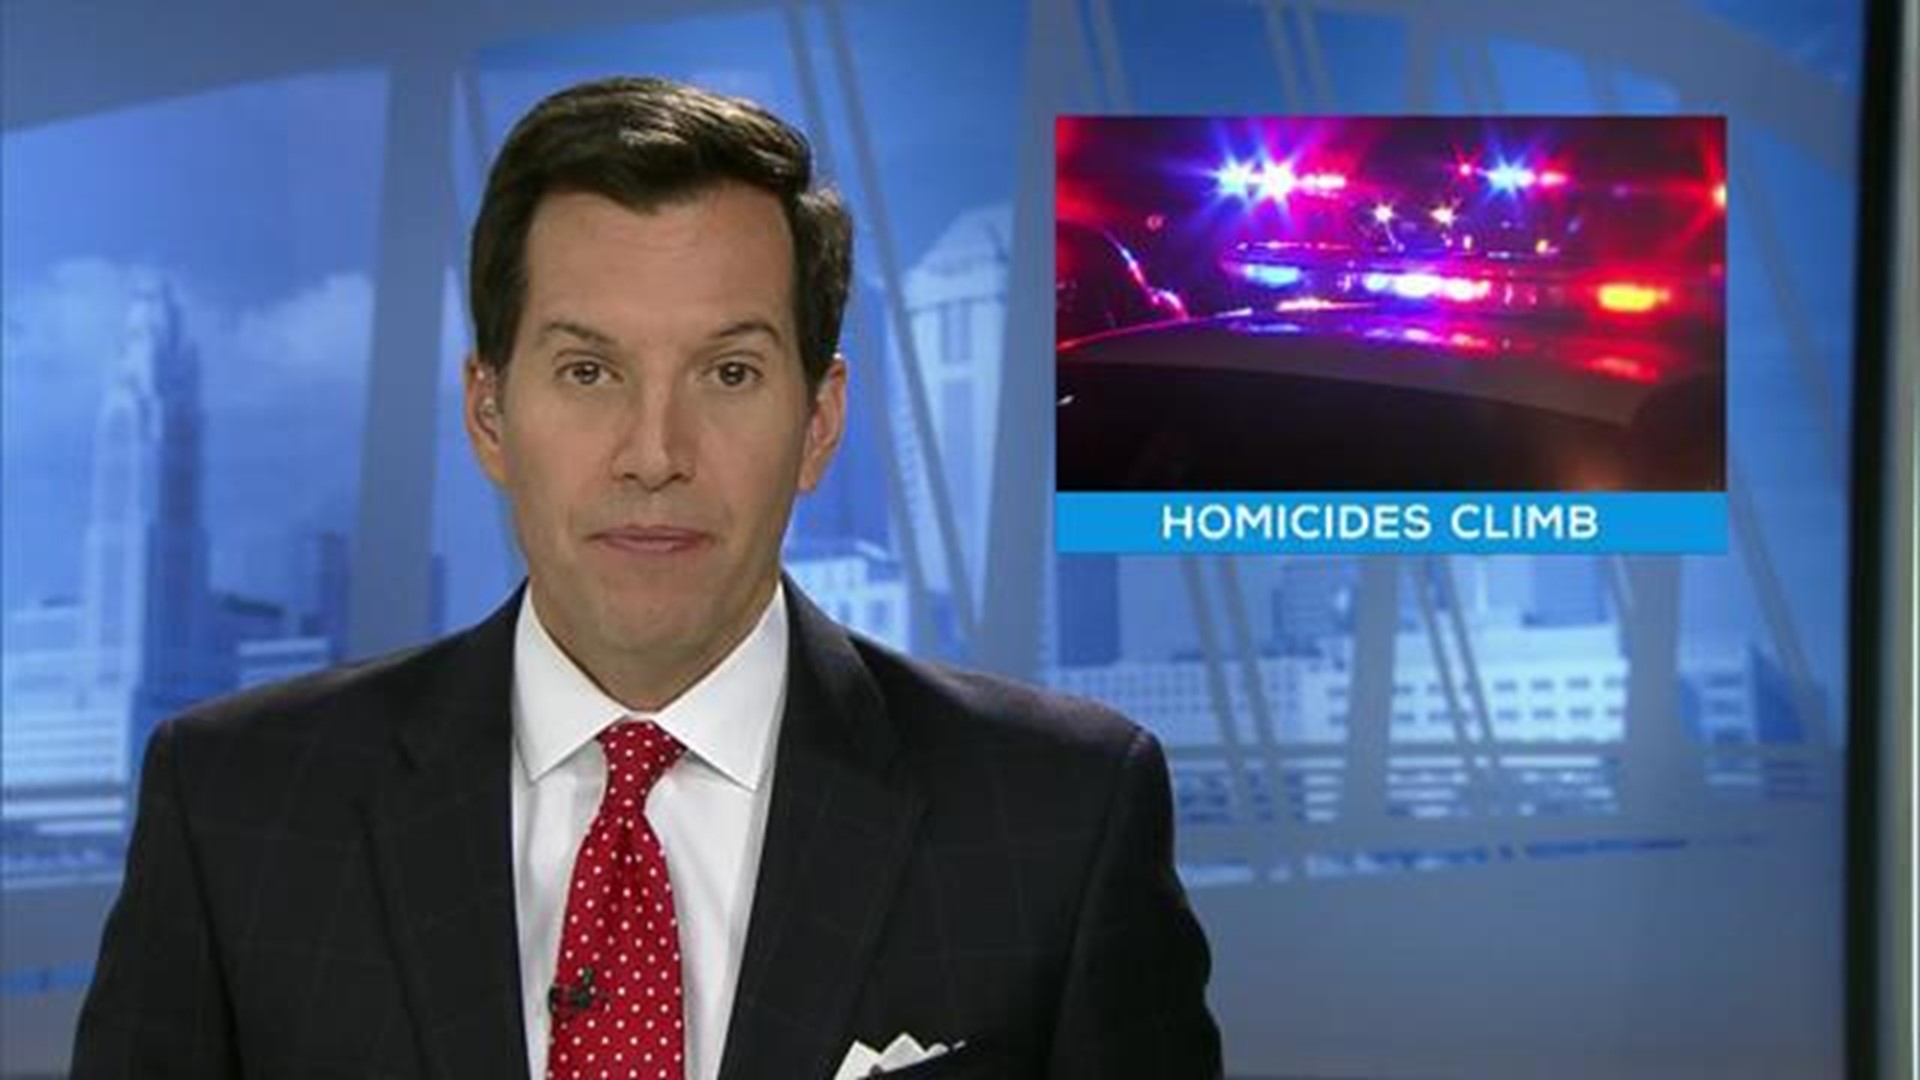 Homicide rate continues to climb